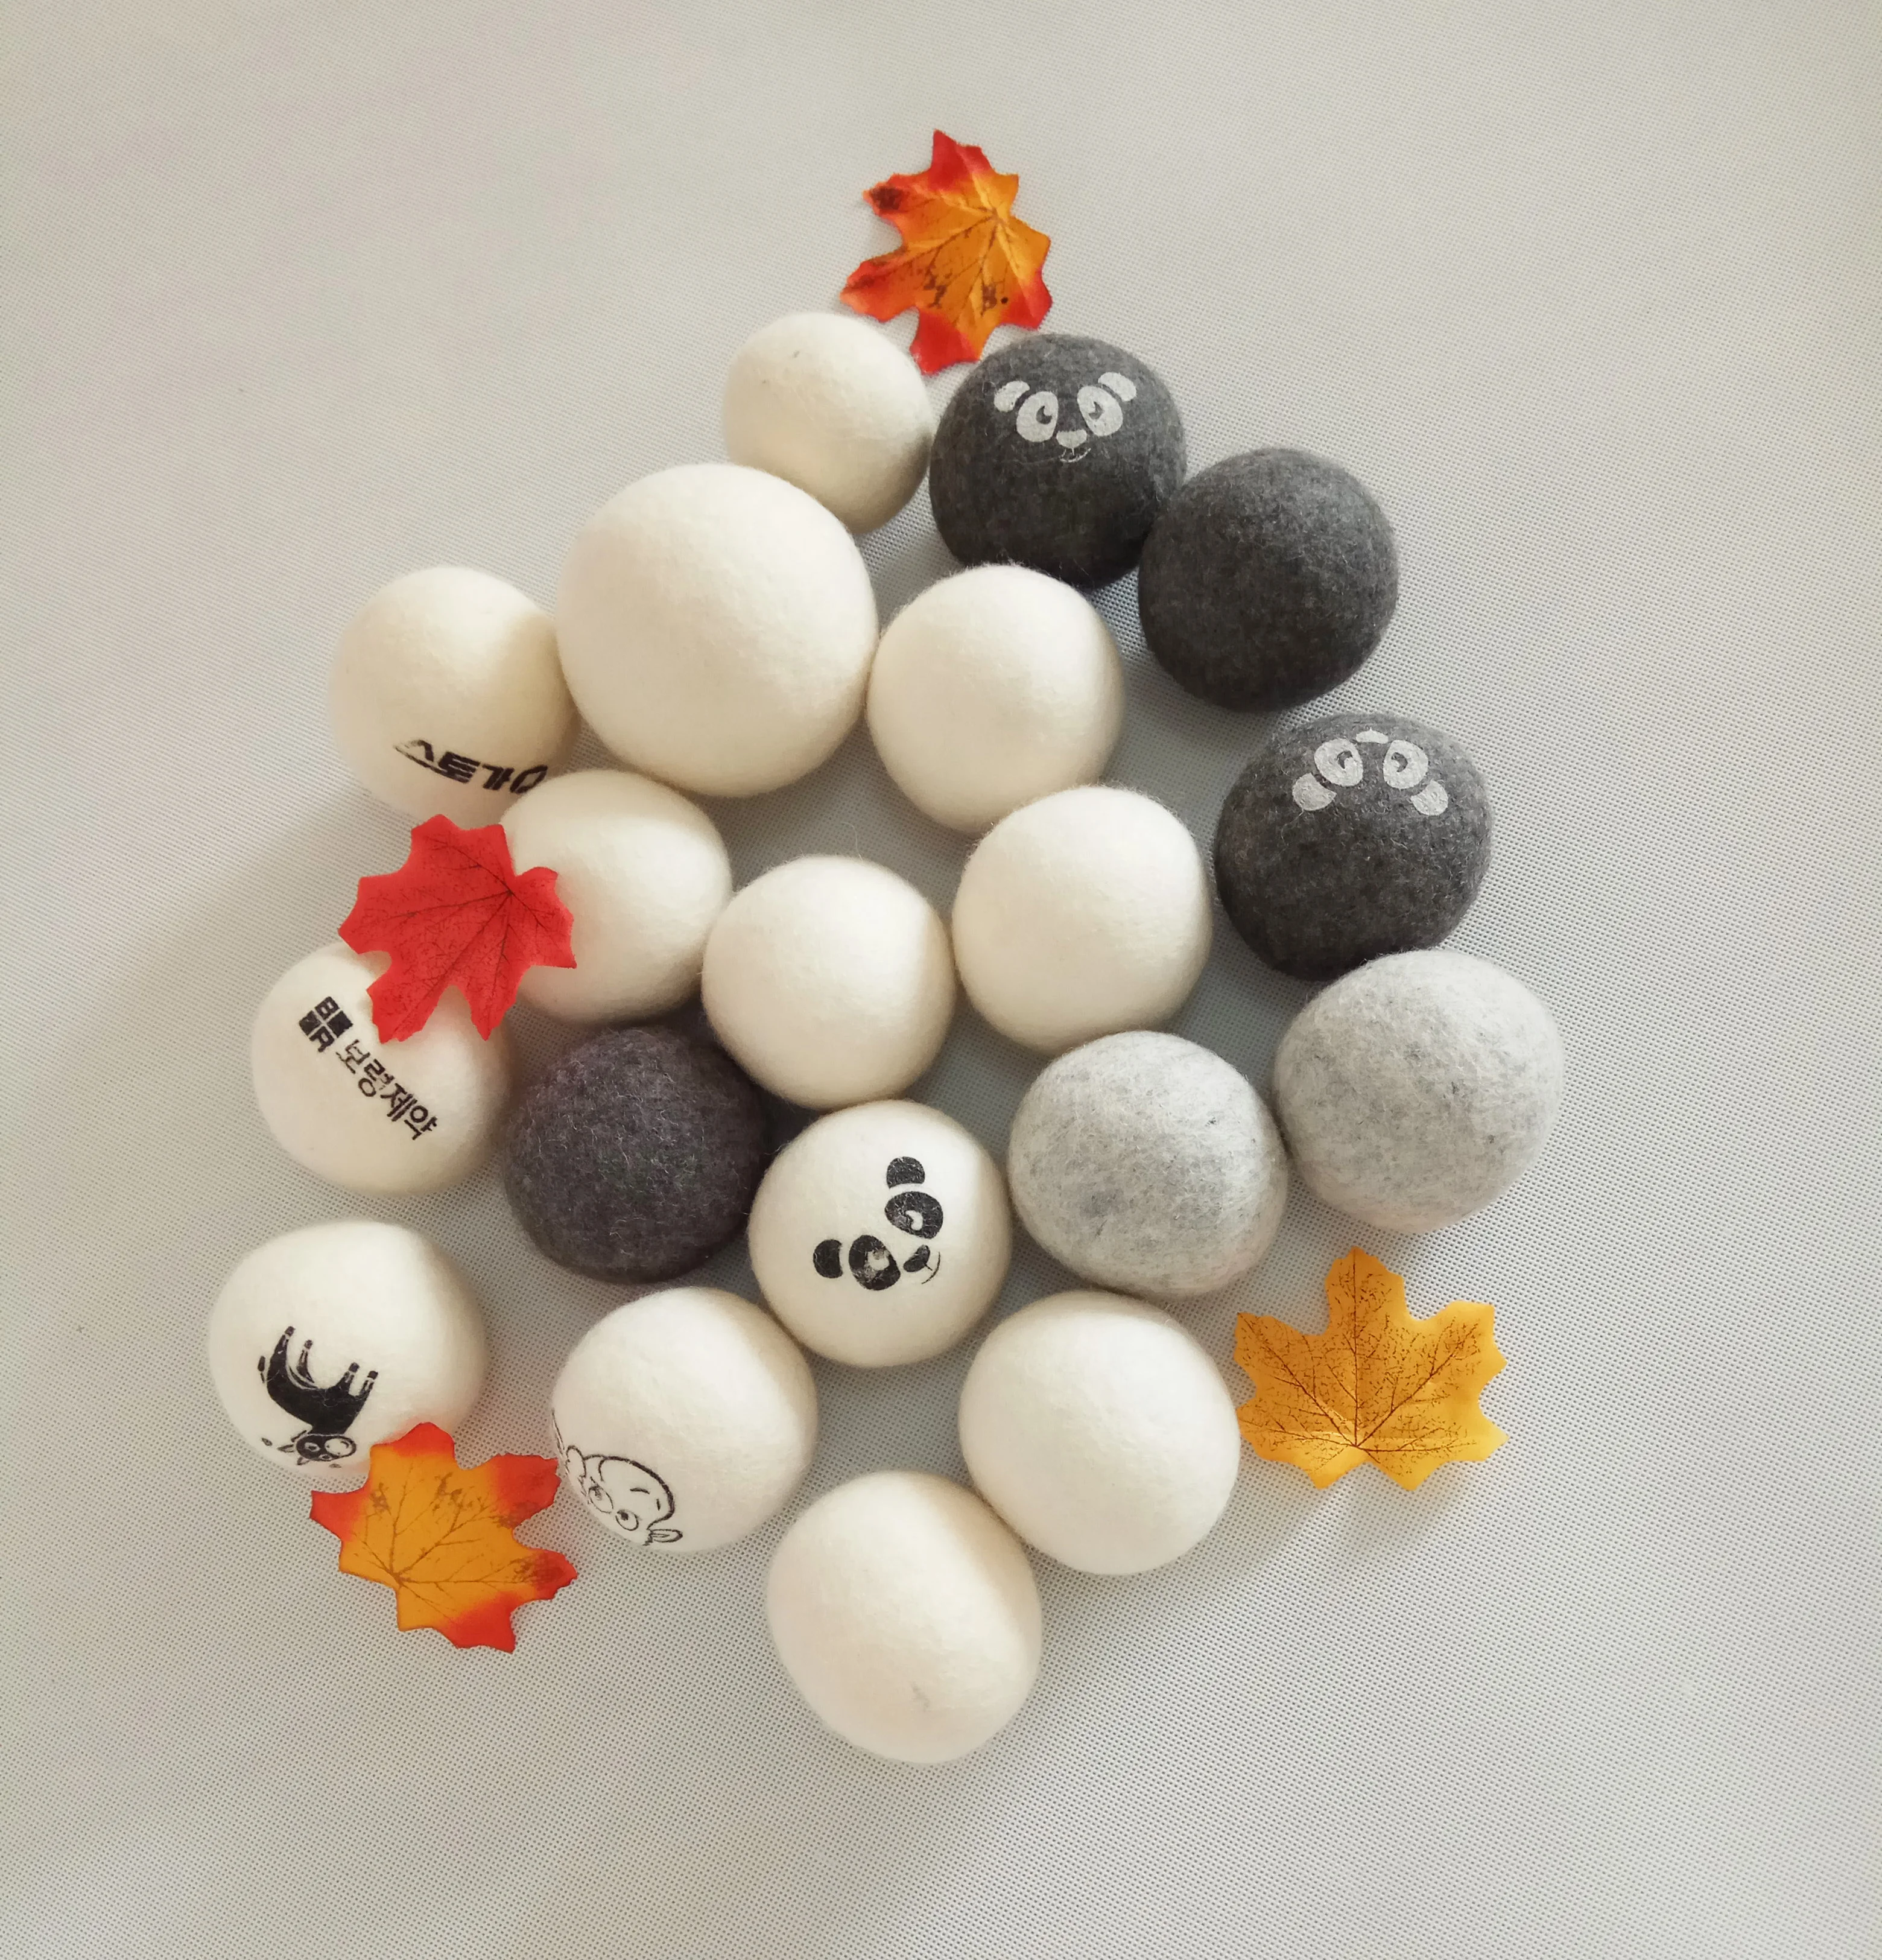 

trends products 2019 new arrivals amazon new products pure organic New zealand wool dryer balls as seen on TV, Customized color